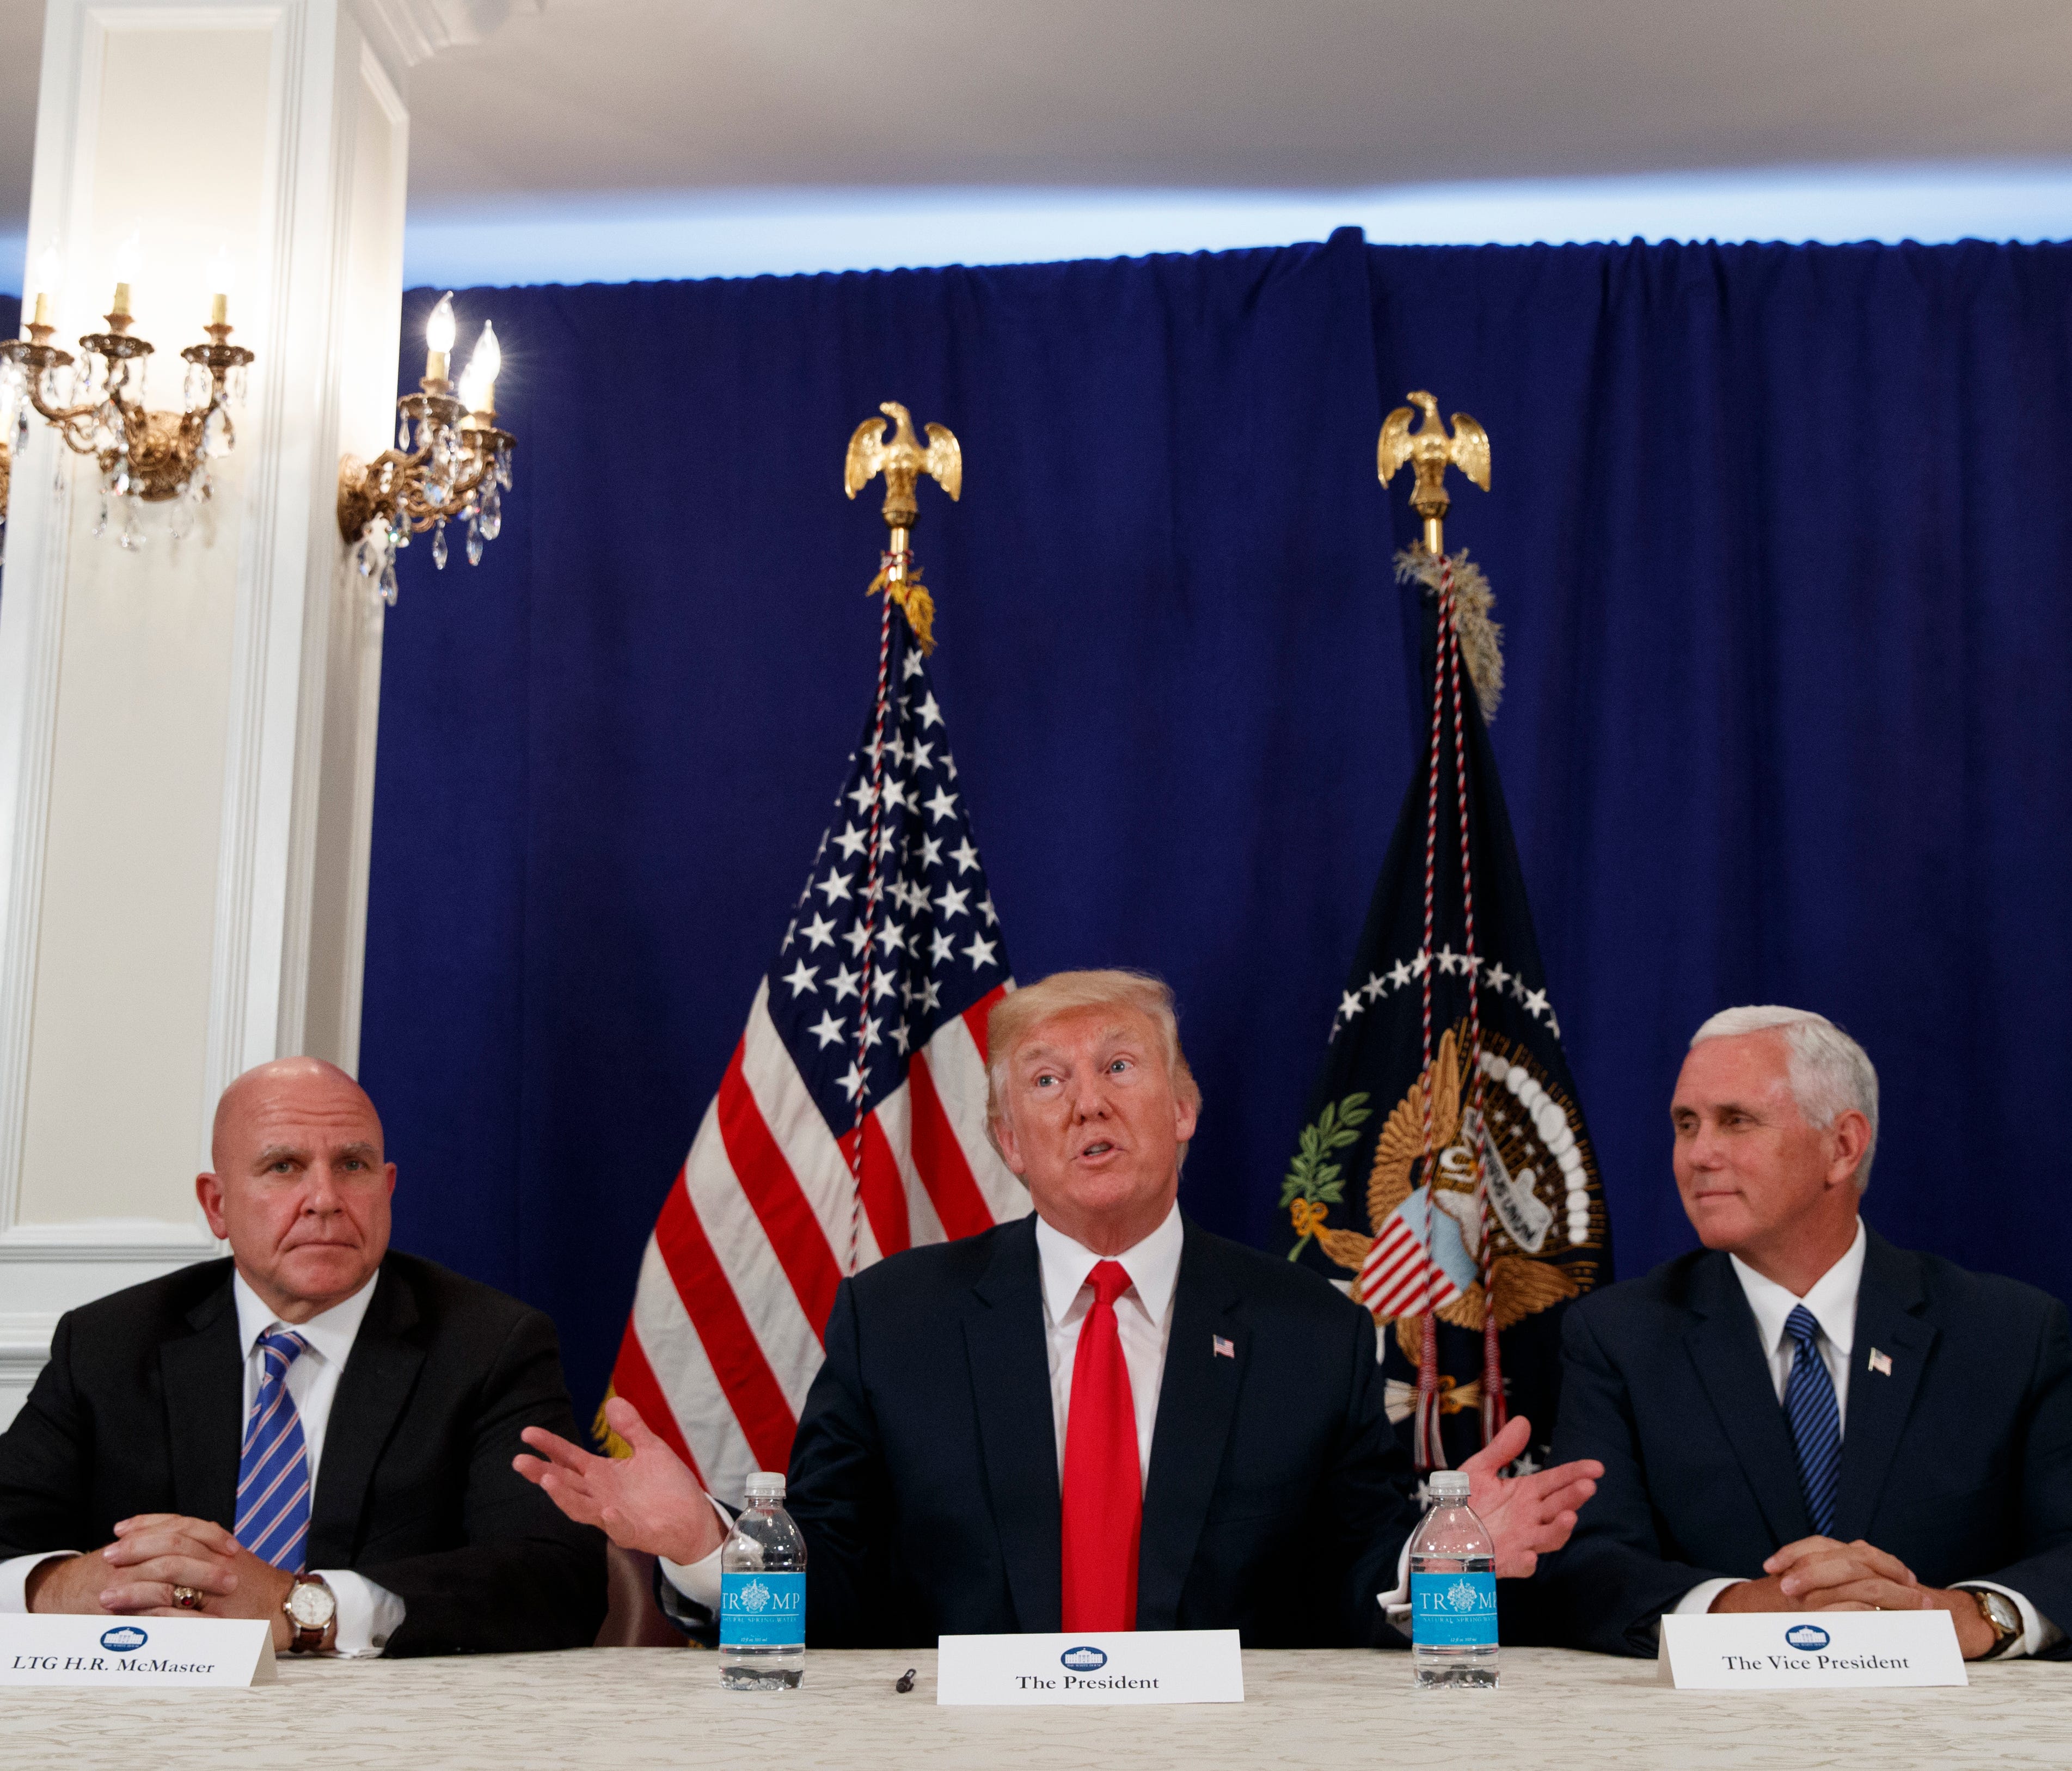 President Donald Trump, flanked by National Security Adviser H.R. McMaster, left, and Vice President Mike Pence, speaks to reporters after a security briefing at Trump National Golf Club in Bedminster, N.J., Thursday, Aug. 10, 2017.